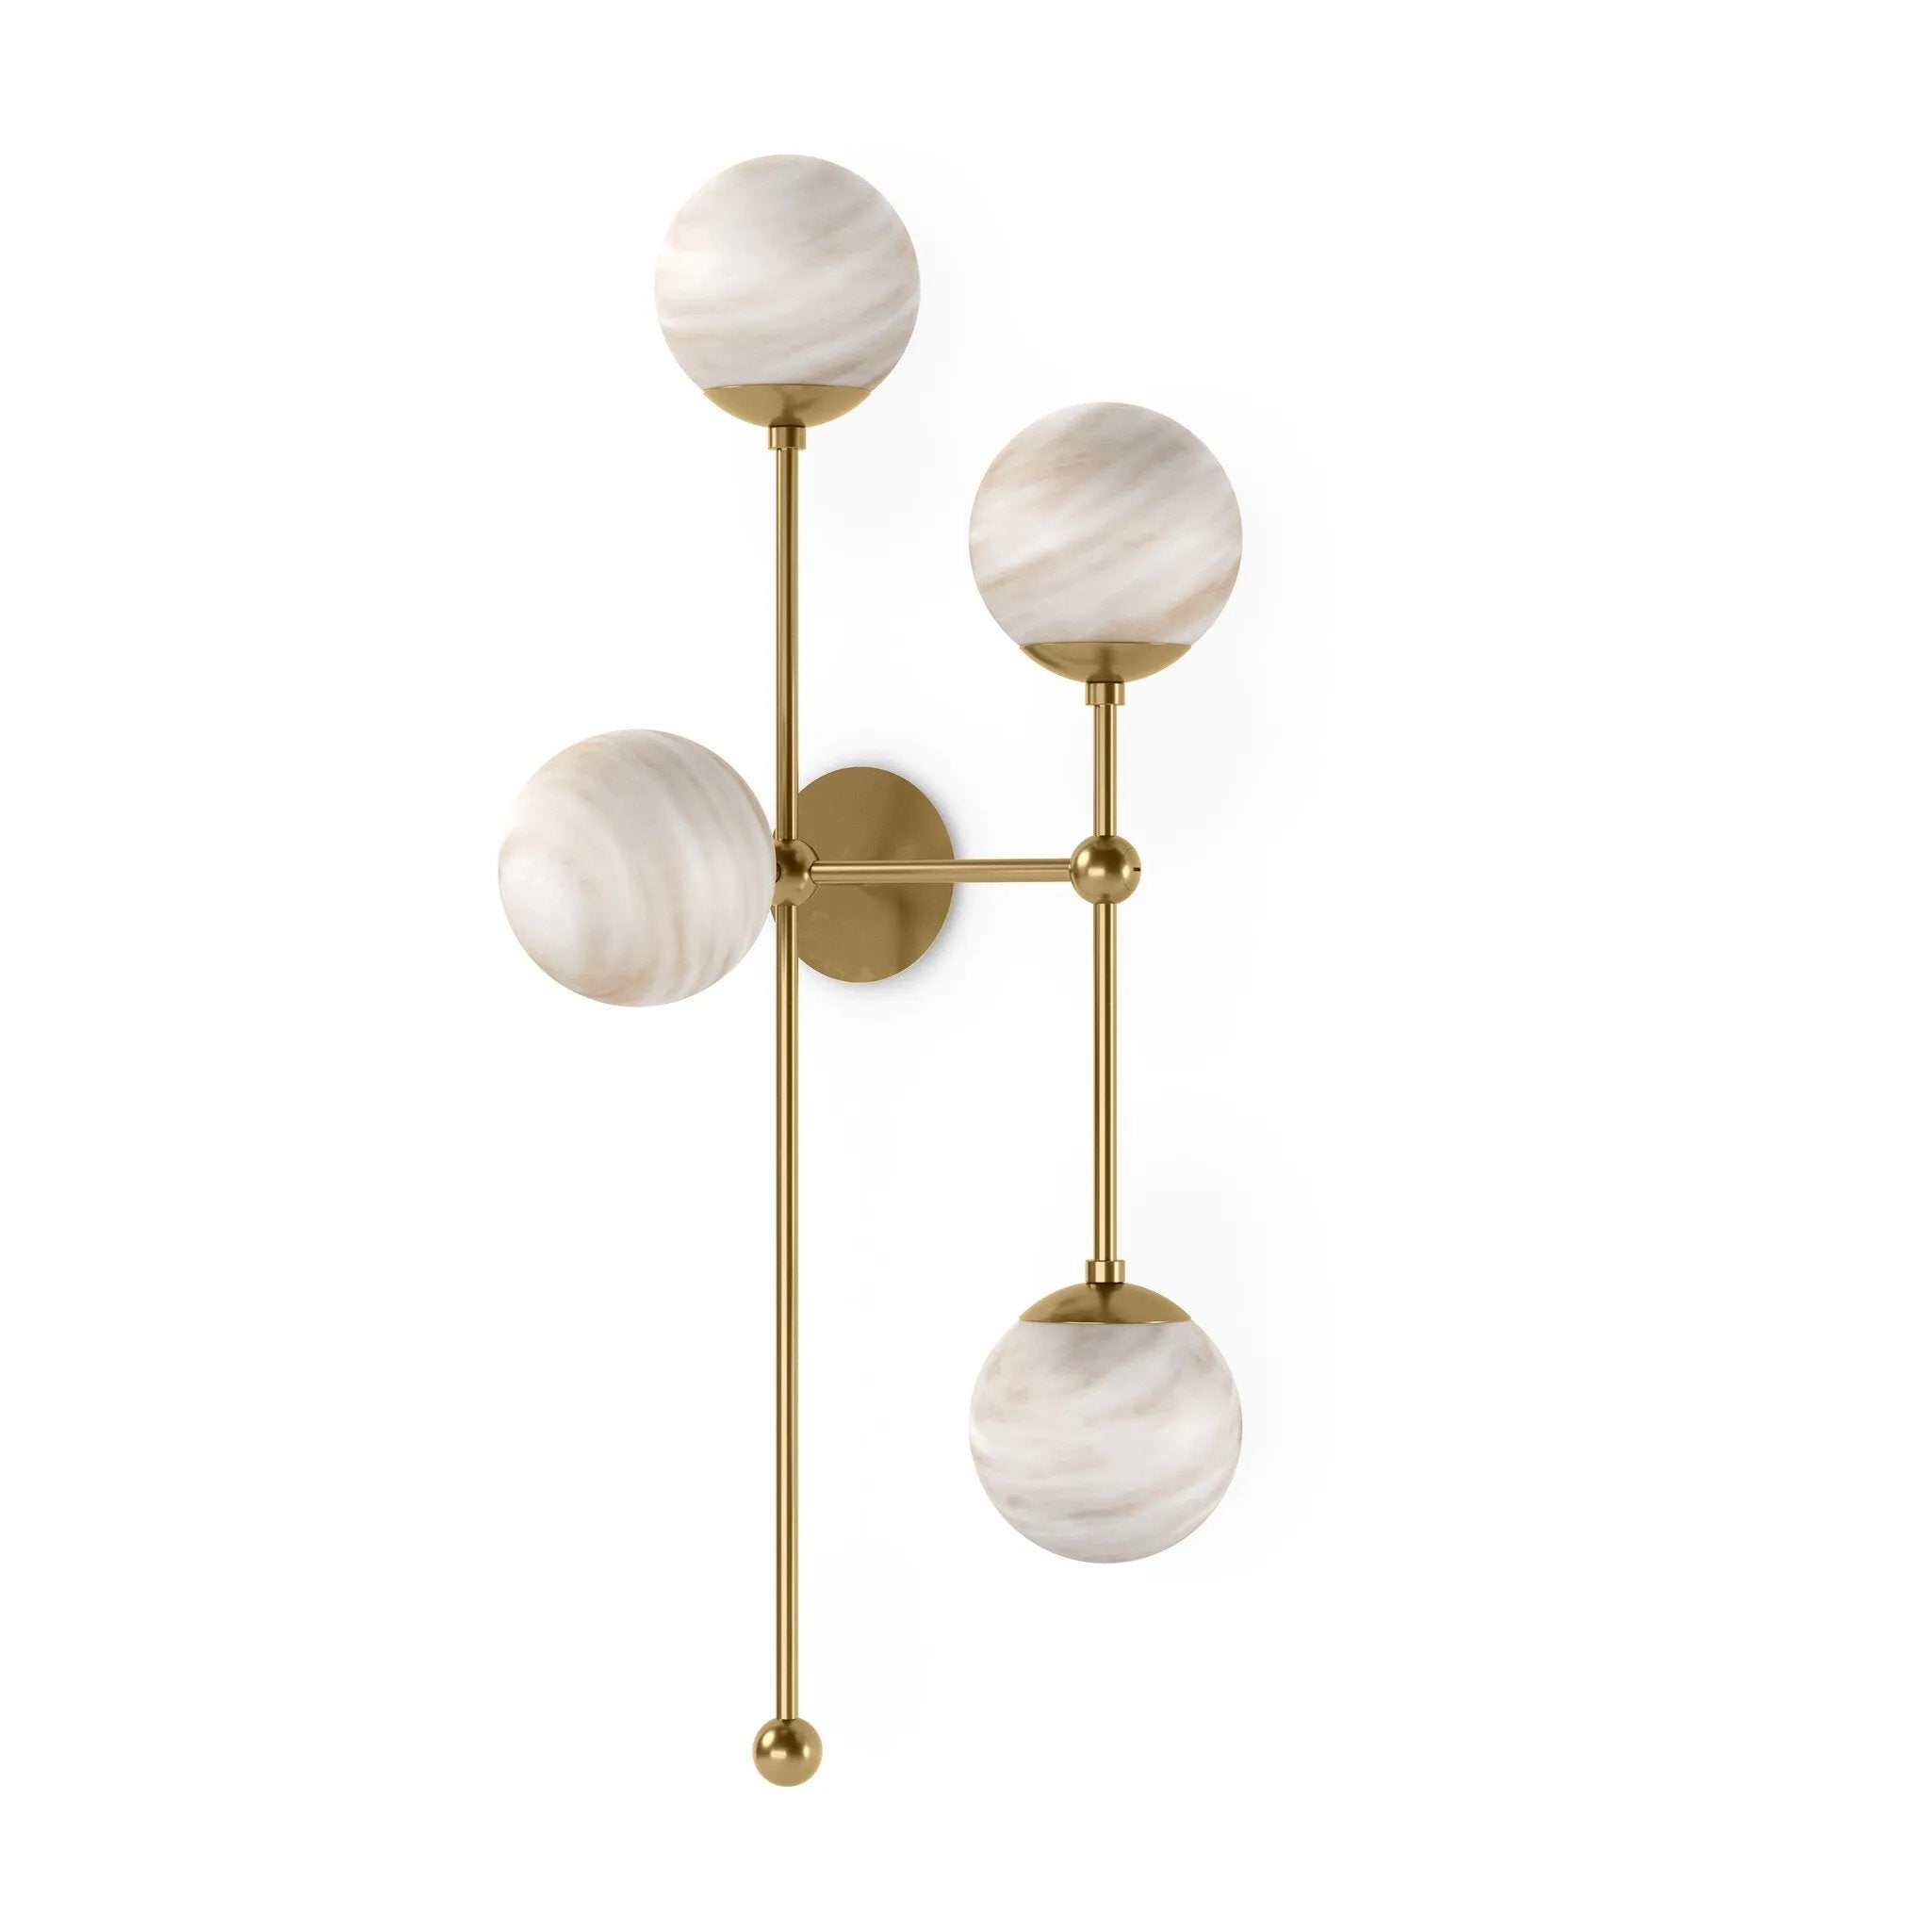 Marbled glass spheres seem to extend and reach across smooth brass rods. Each globe is individually blown, shaped and sculpted by hand through a one-hour process. Brass and glass are 98% recyclable. Designed and sustainably made in Poland by Schwung.Overall Dimensions13.75"w x 13.00"d x 36.25"hFull Details &amp; SpecificationsTear Shee Amethyst Home provides interior design, new home construction design consulting, vintage area rugs, and lighting in the Dallas metro area.